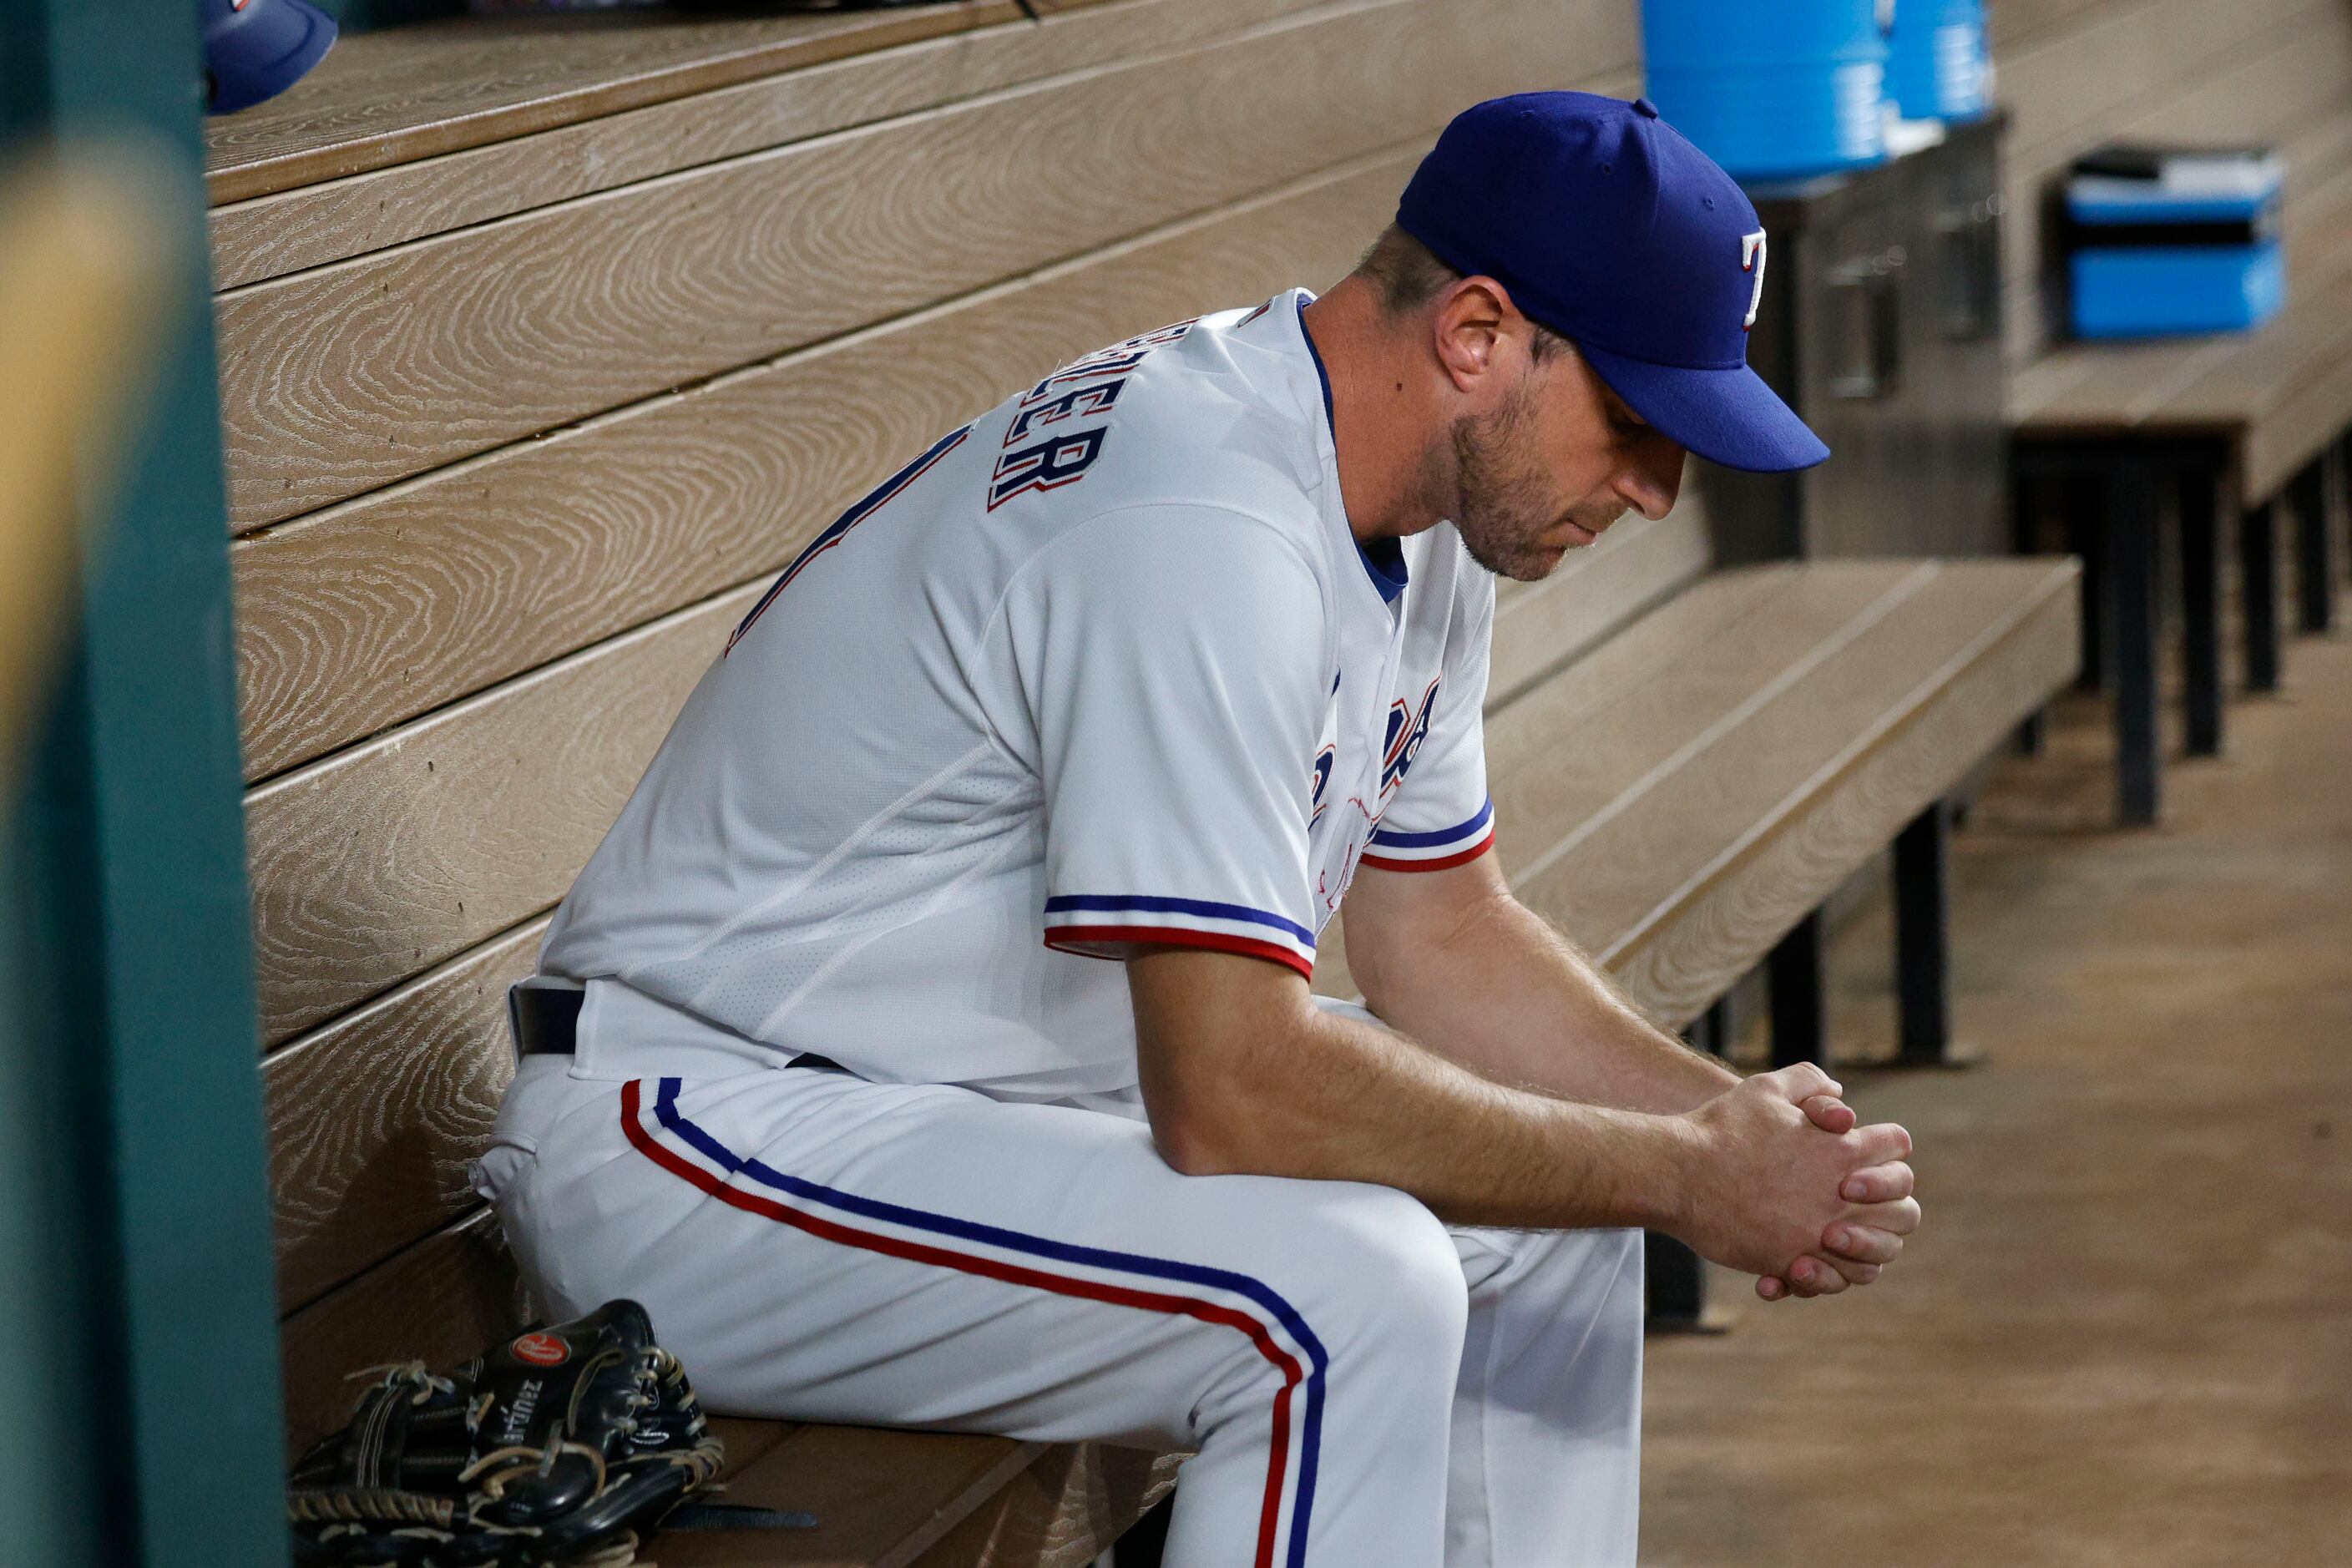 Mets star pitcher Scherzer facing six to eight weeks out - AS USA